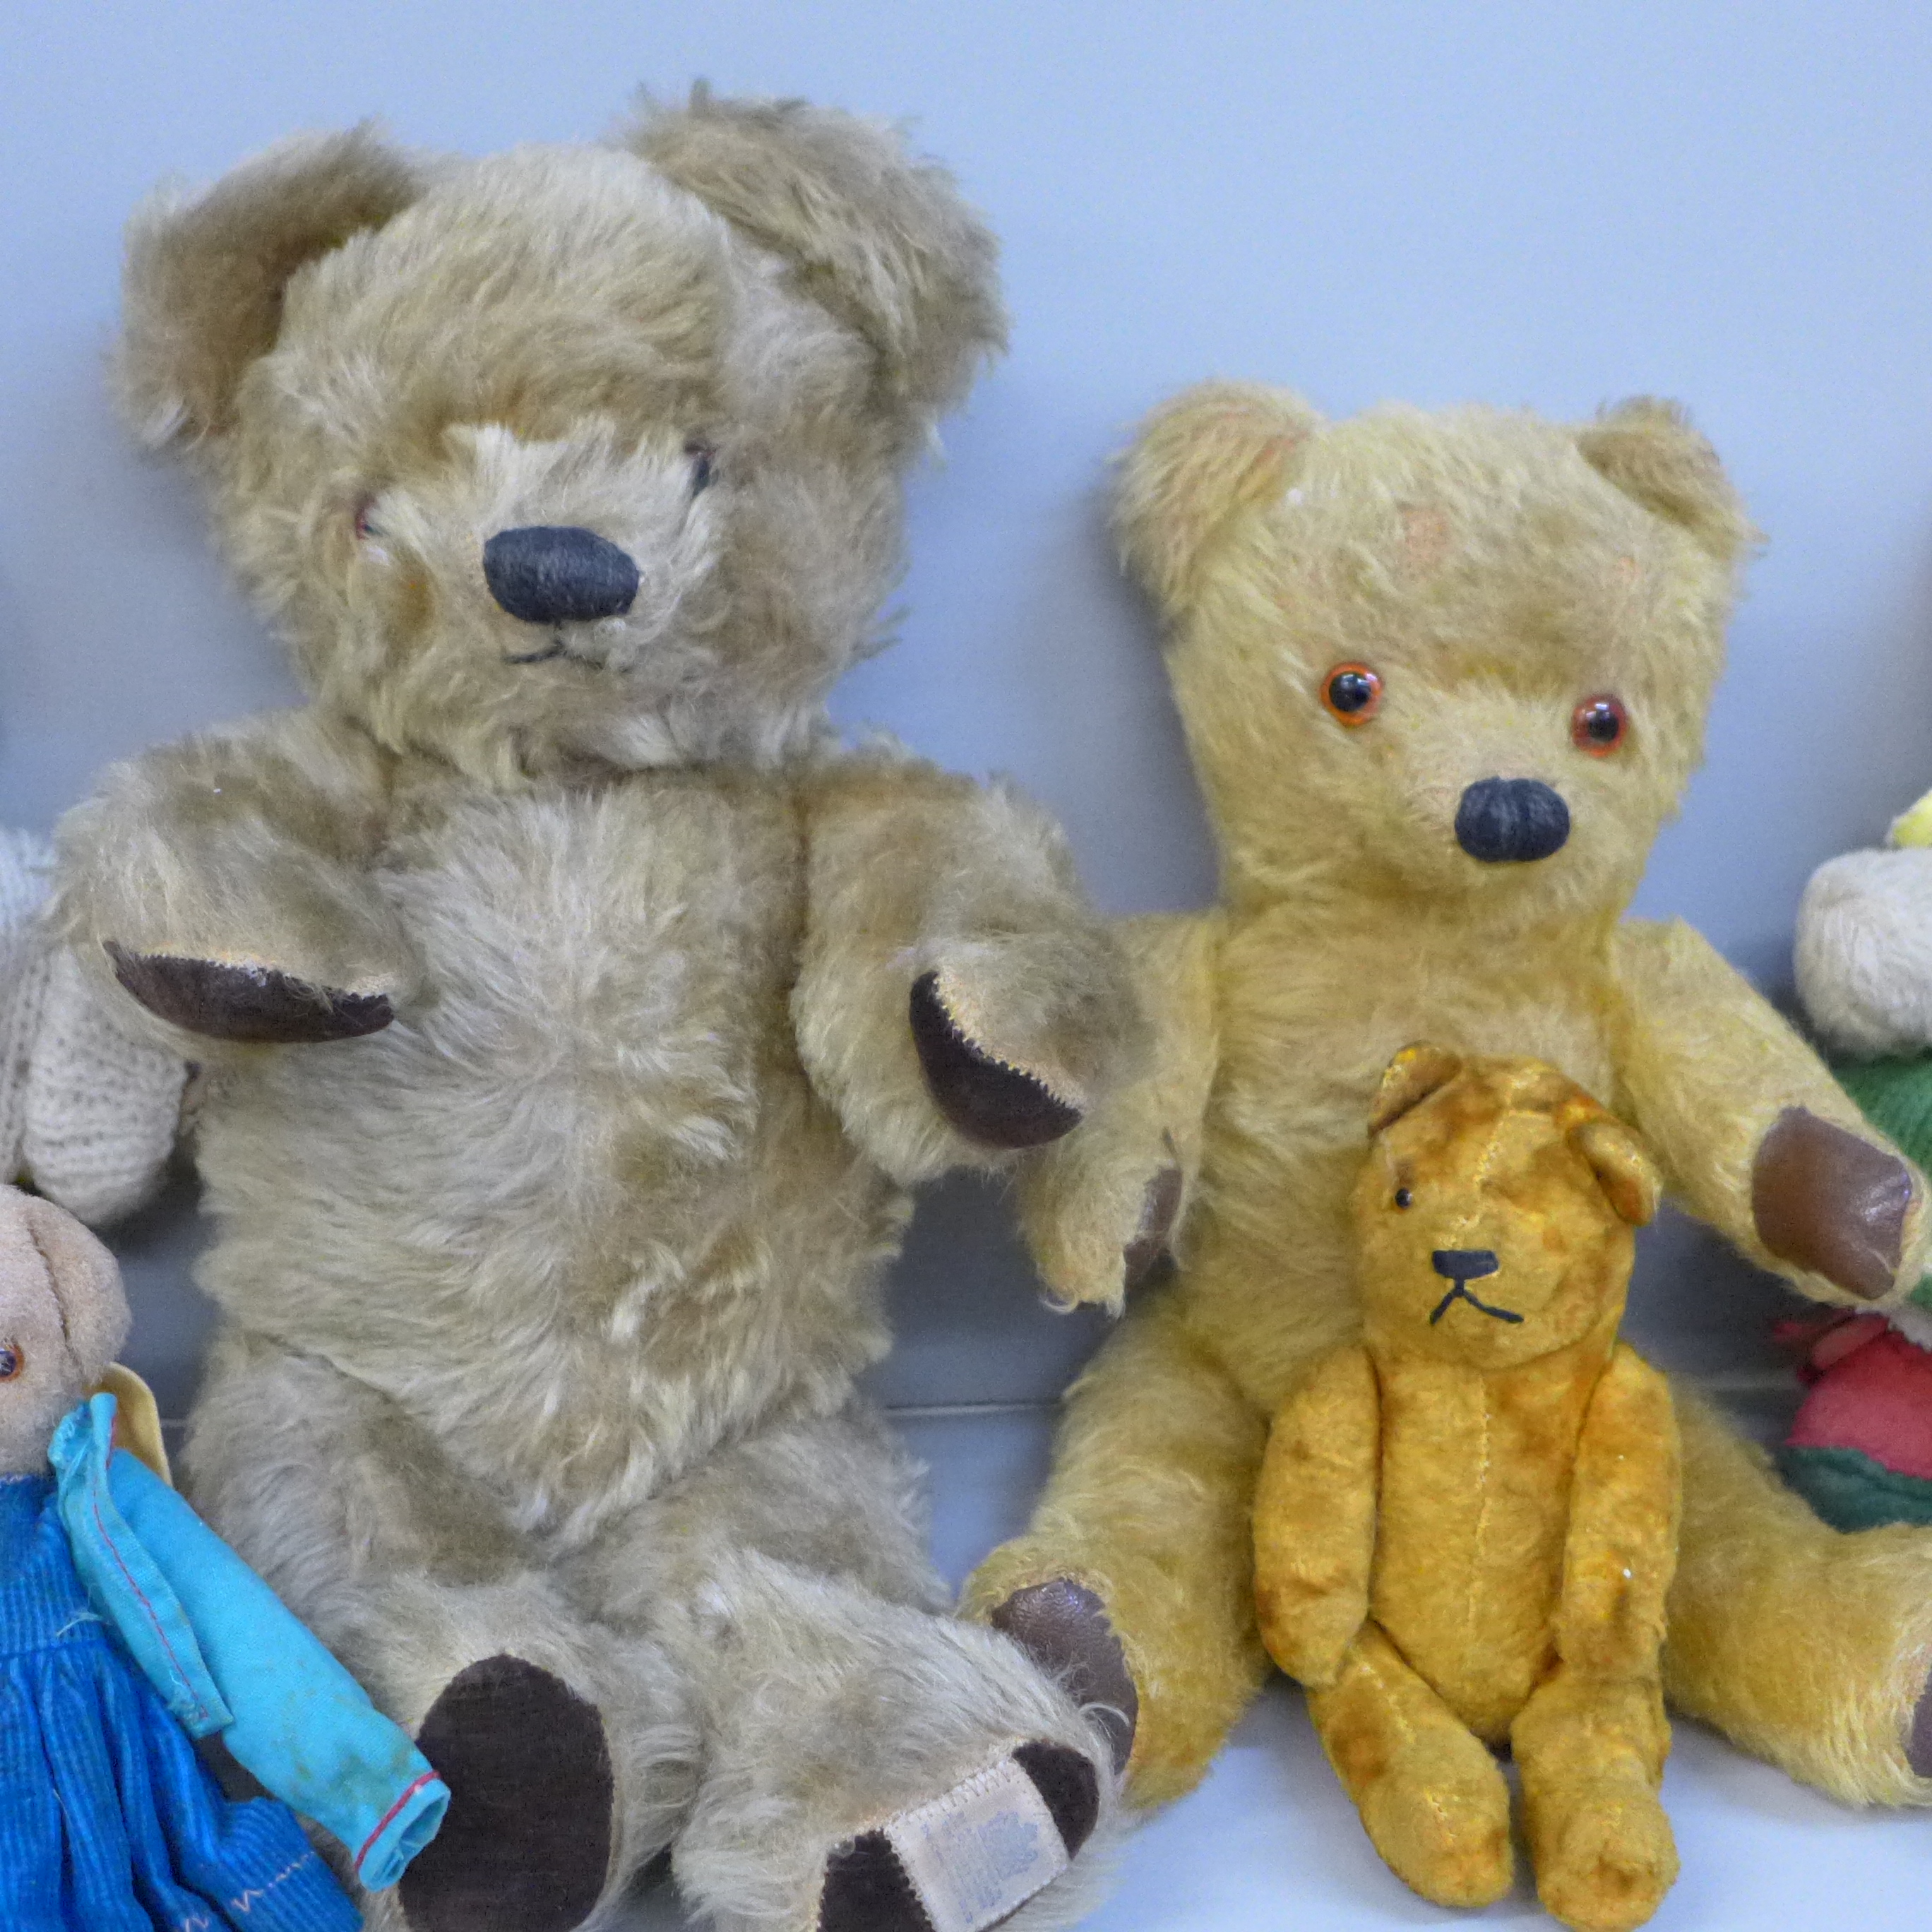 Seven vintage Teddy bears including one musical - Image 3 of 5